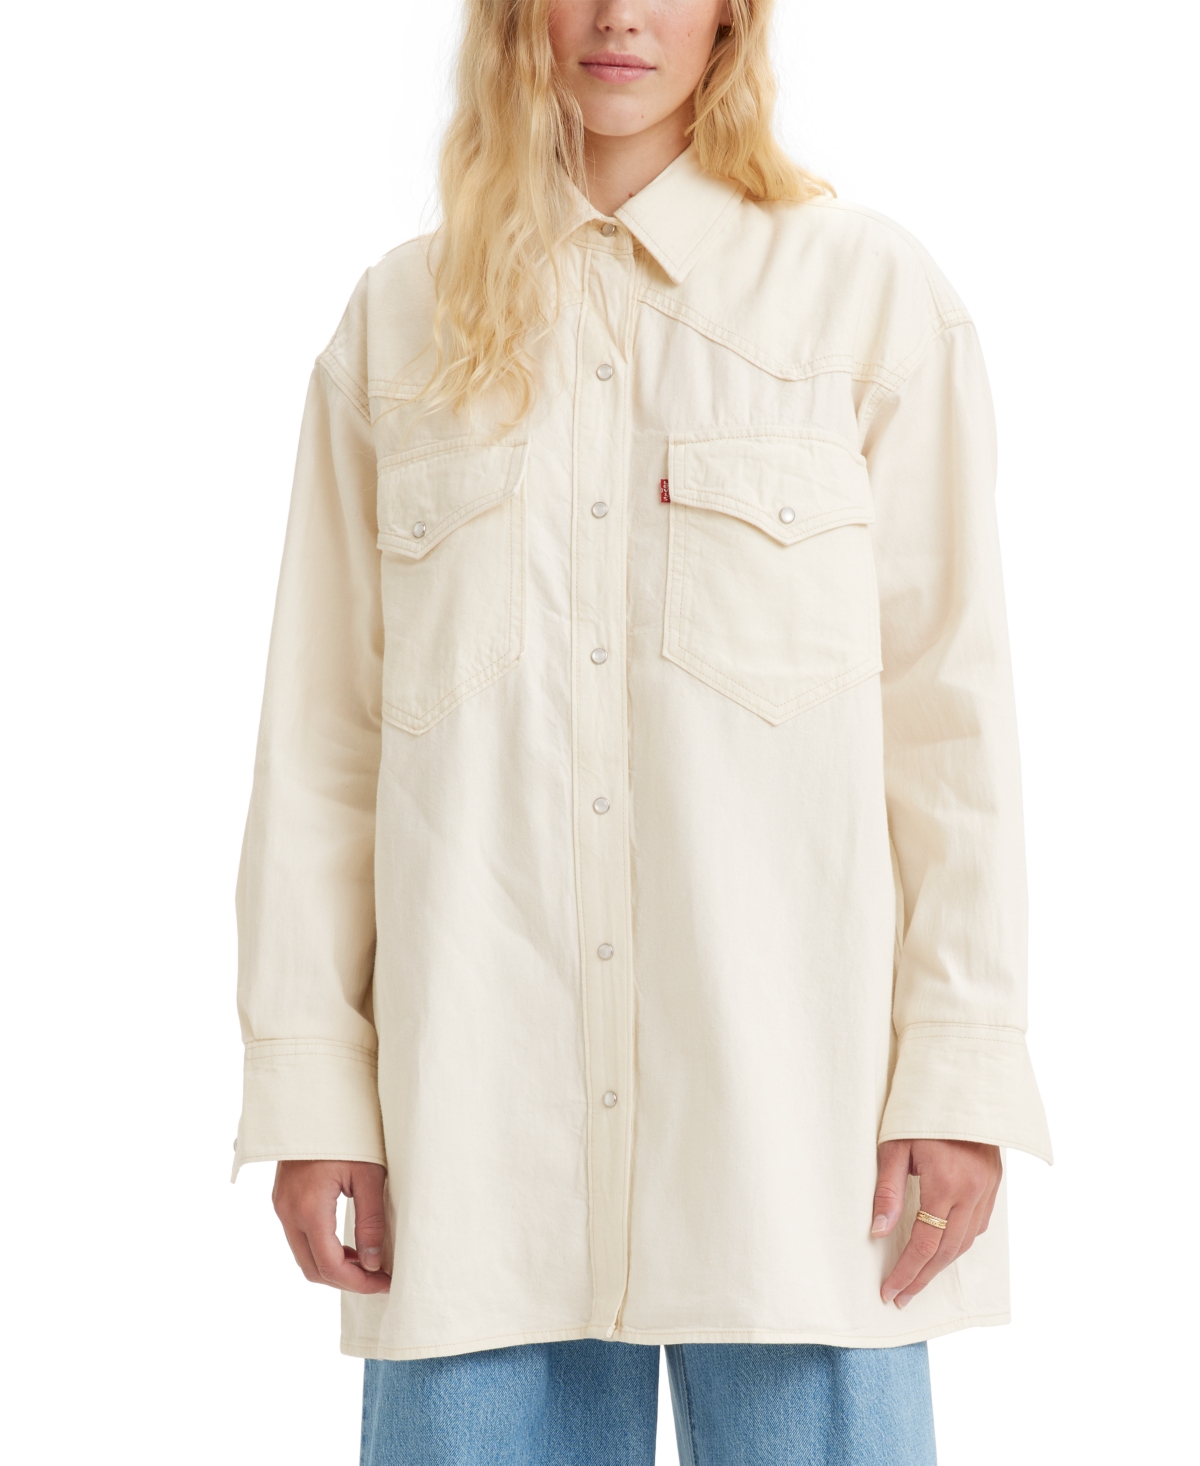 LEVI'S WOMEN'S DYLAN RELAXED OVERSIZED WESTERN SHIRT